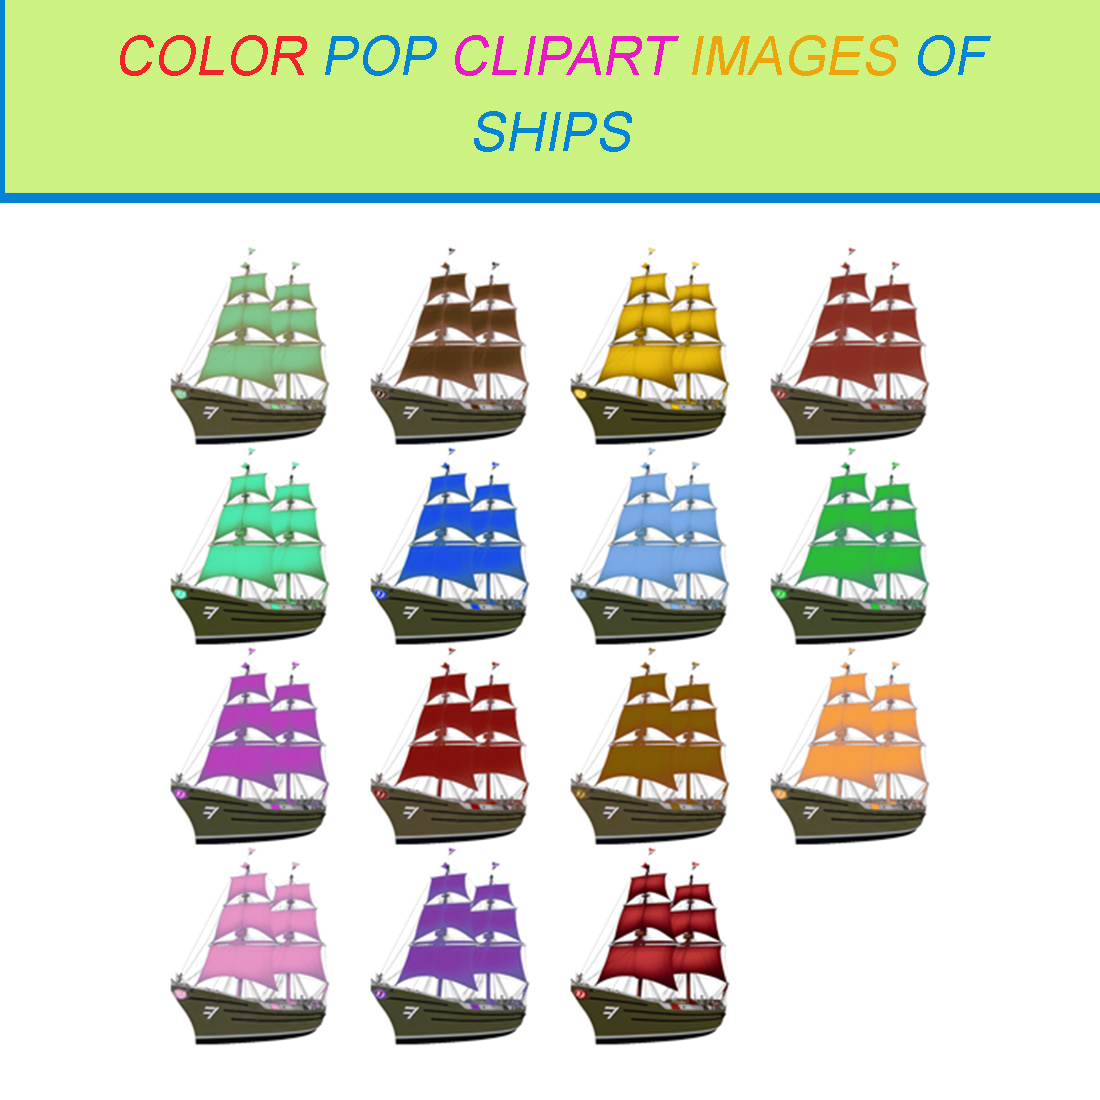 15 COLOR POP CLIPART IMAGES OF SHIPS cover image.